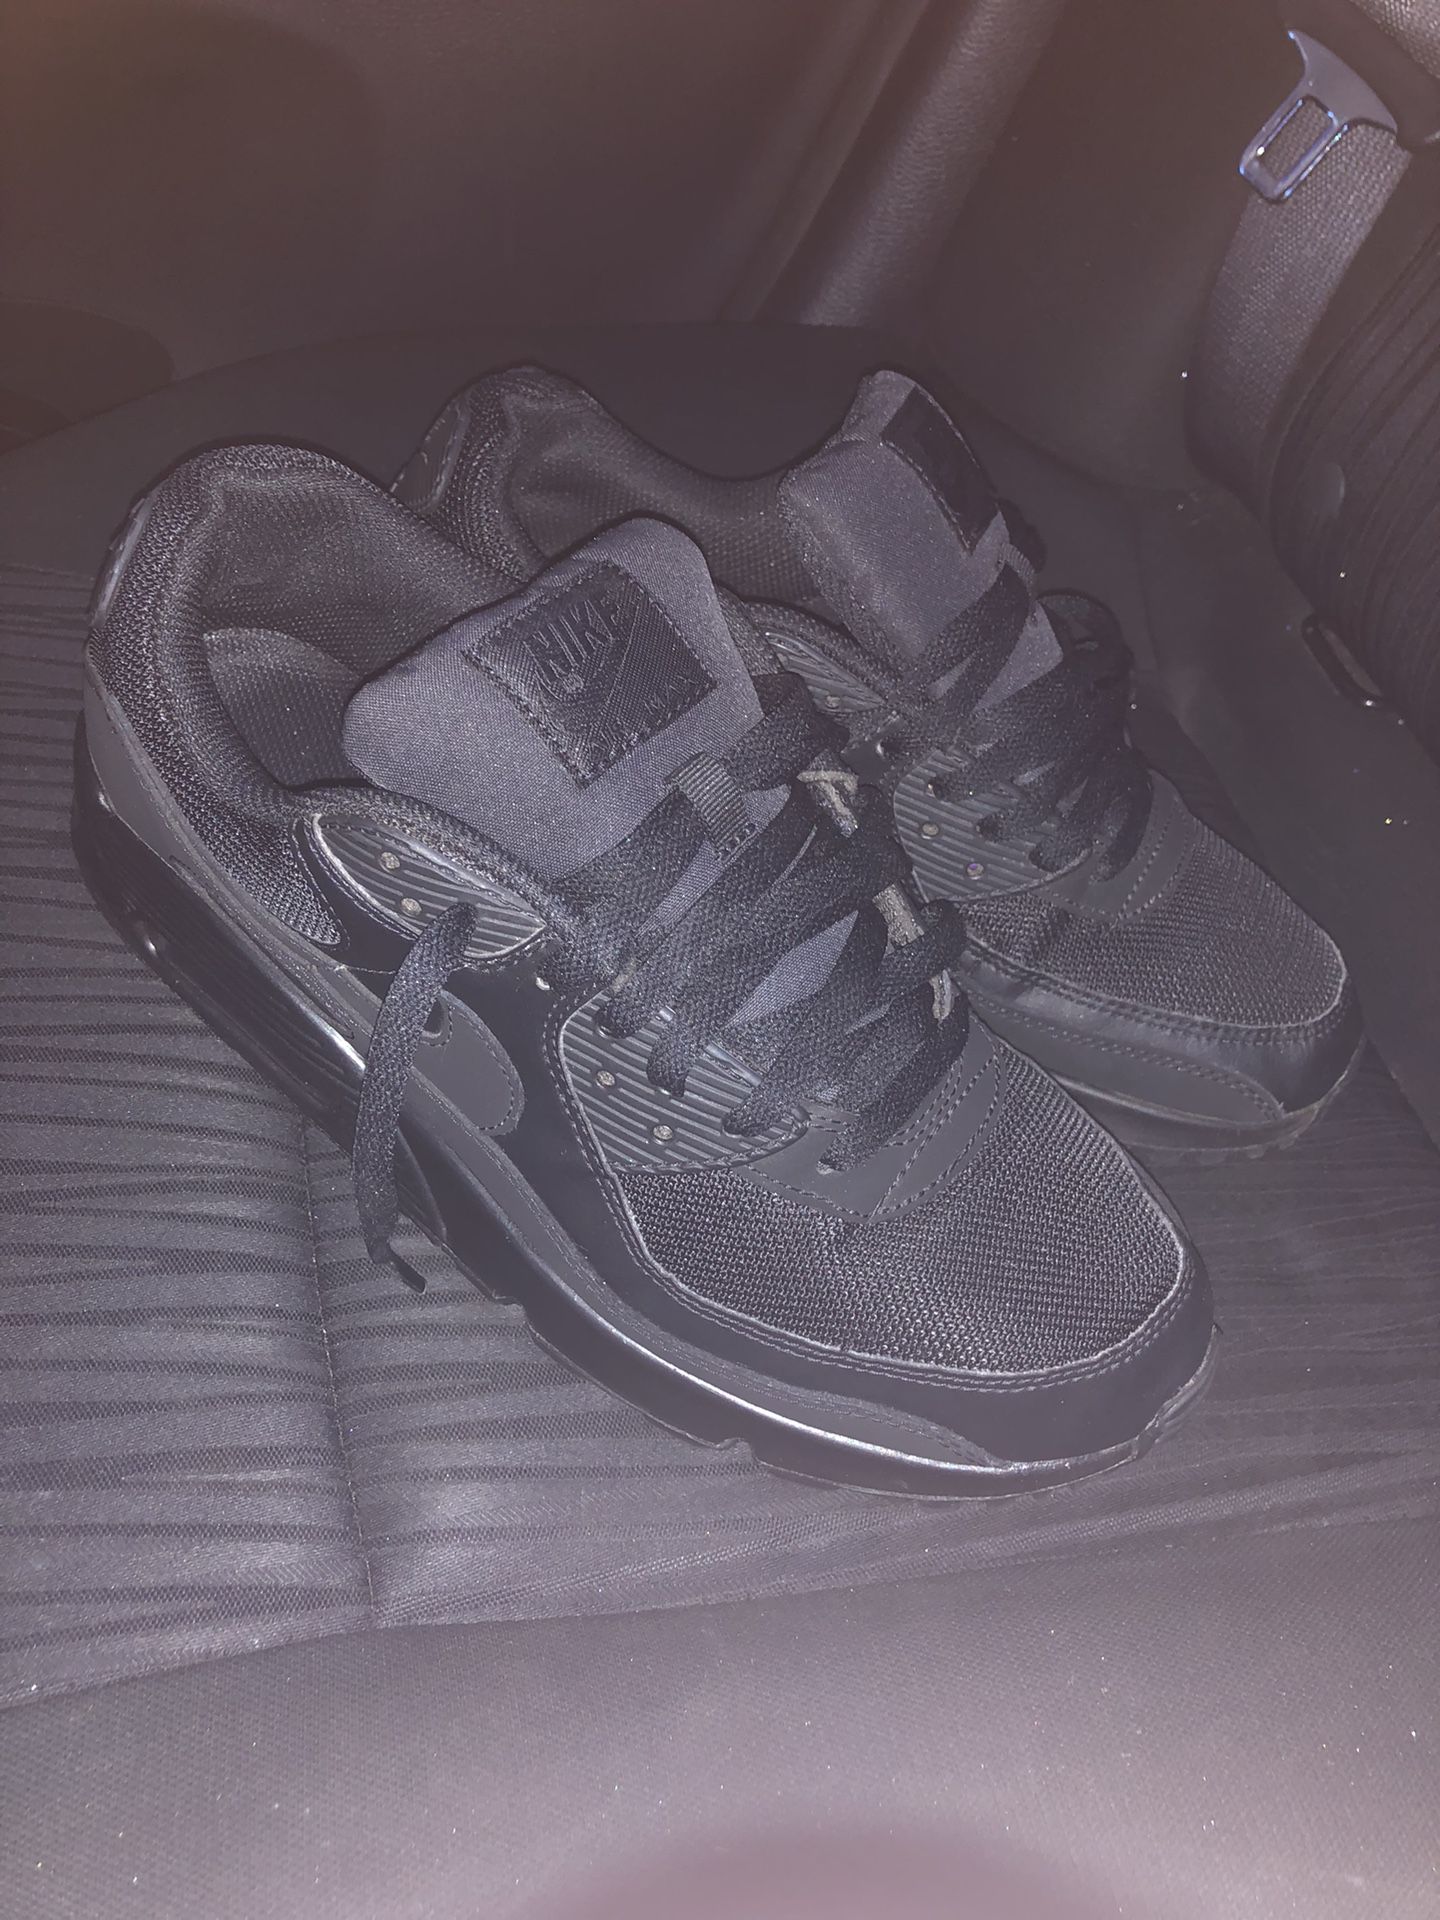 Size 10 Nike Air Max Blacked Out 